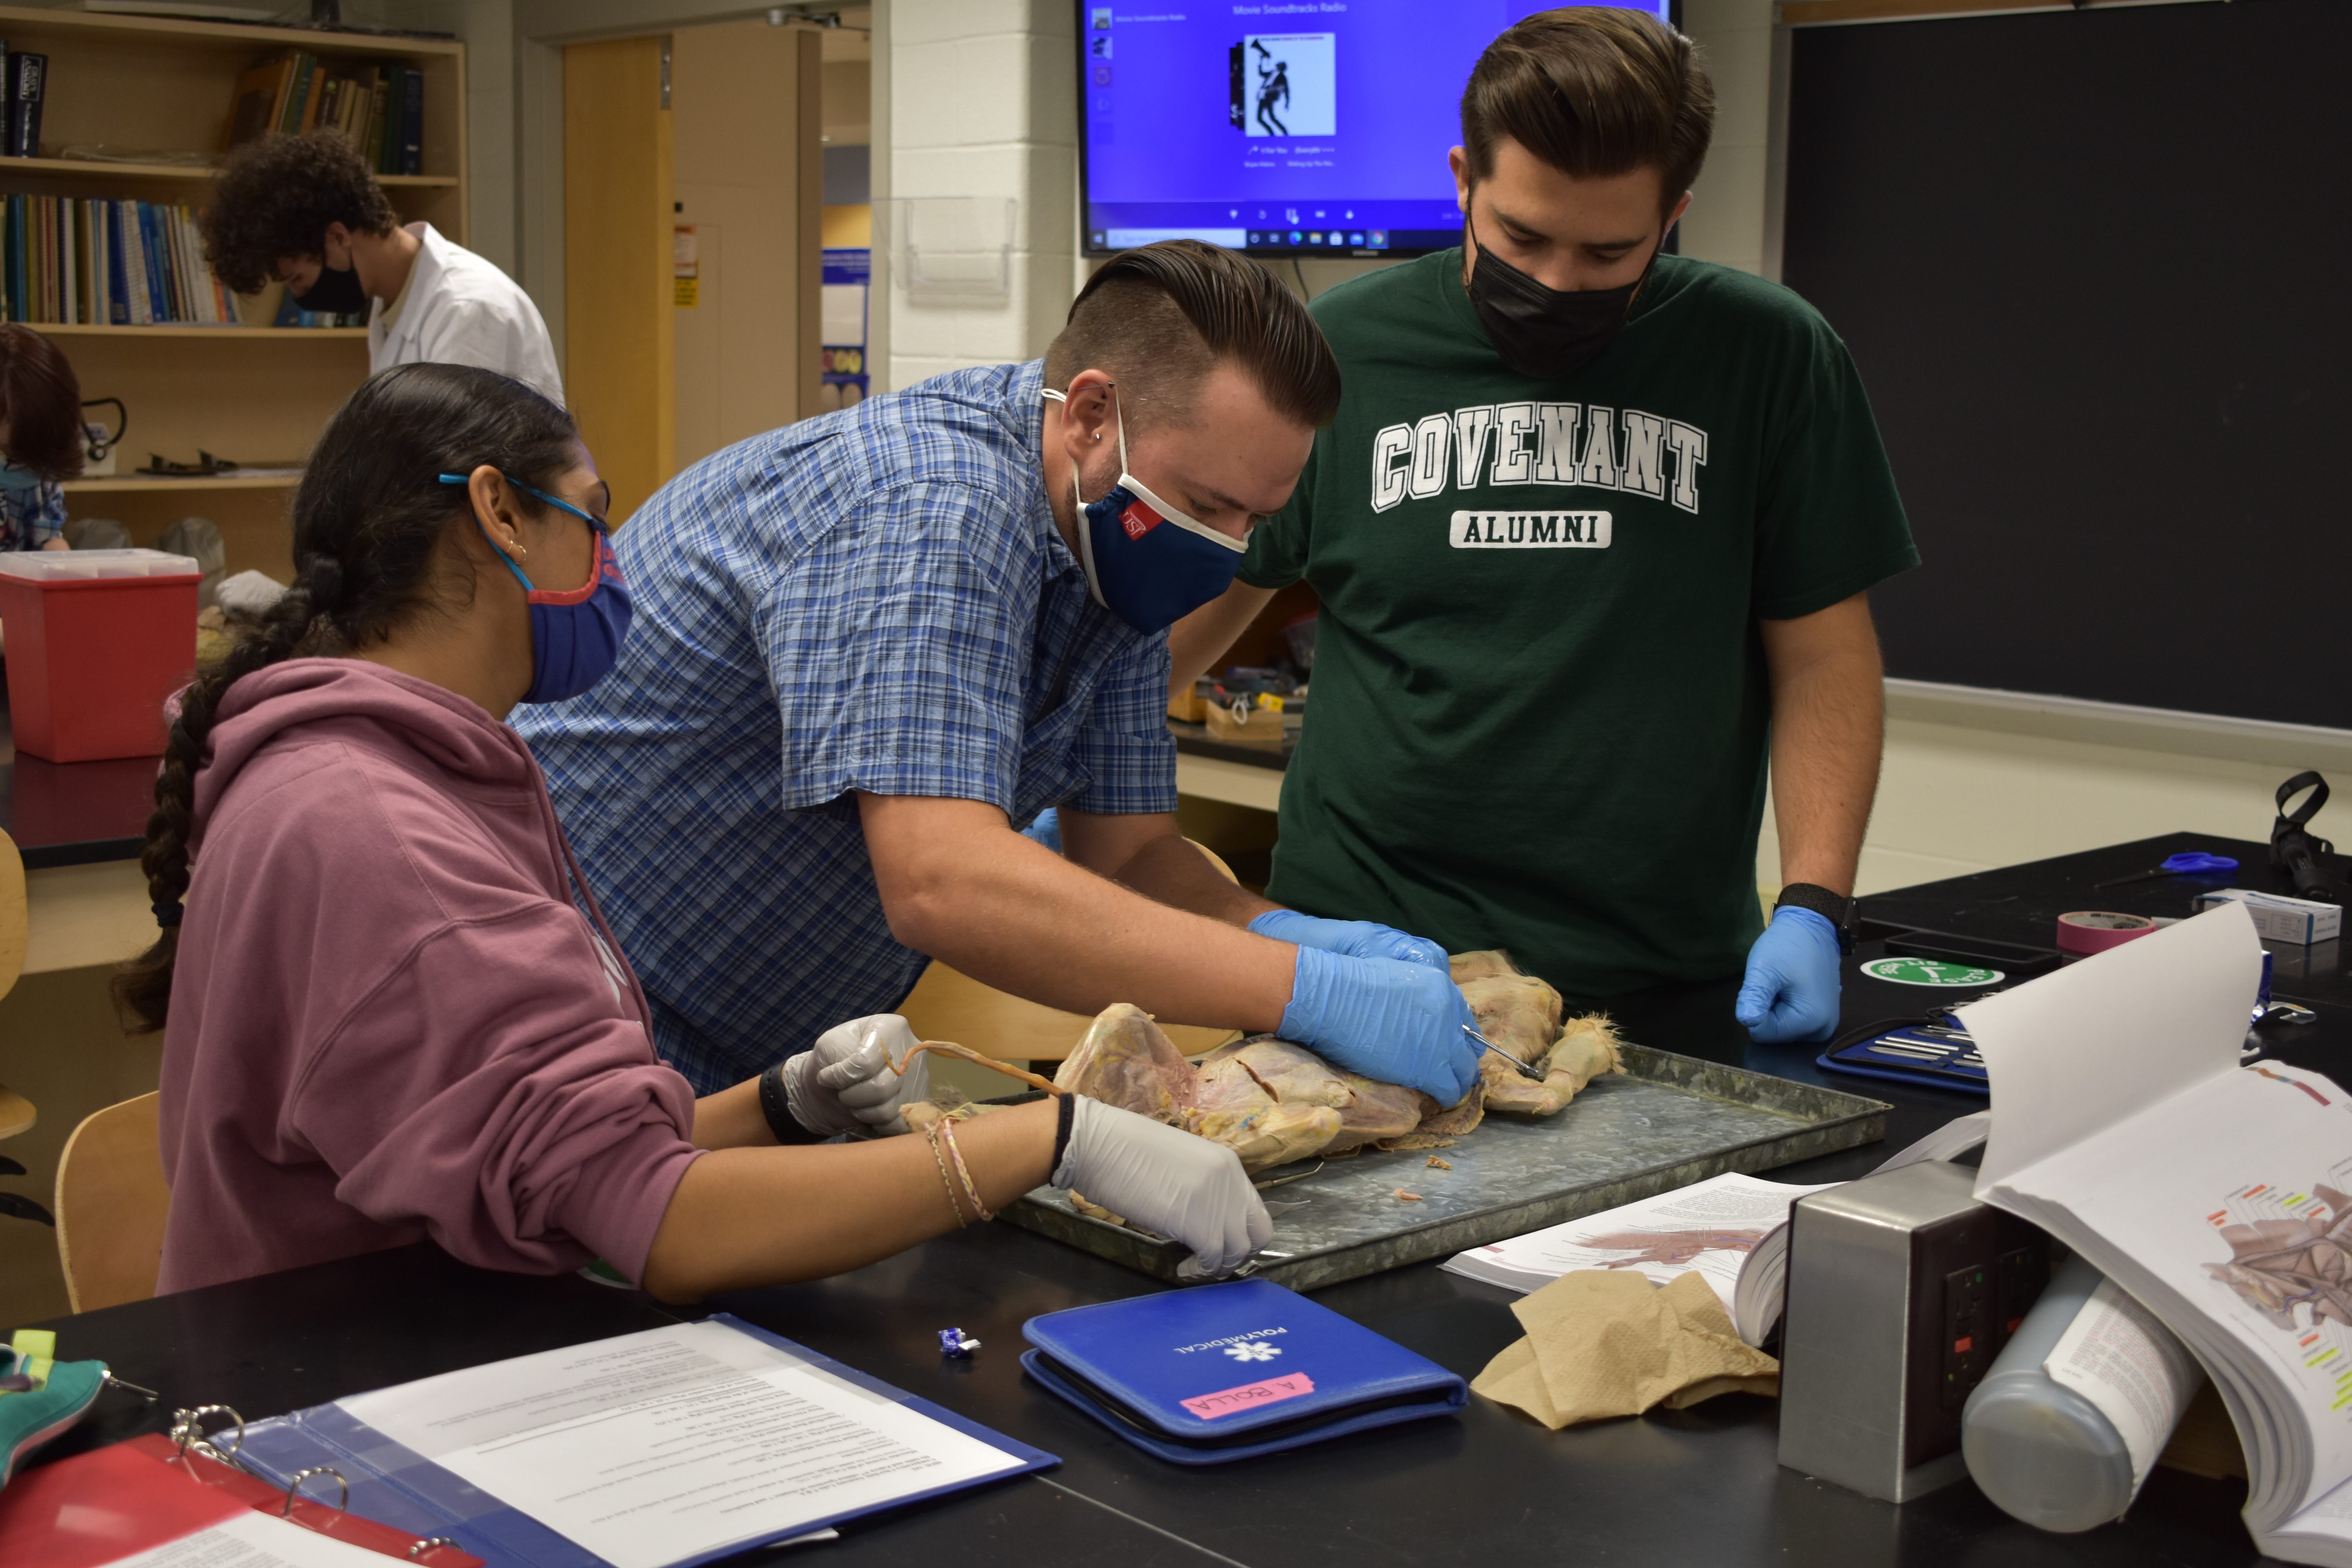 Dr. Kyle Mara works shows USI Biology students how to dissect a specimen.